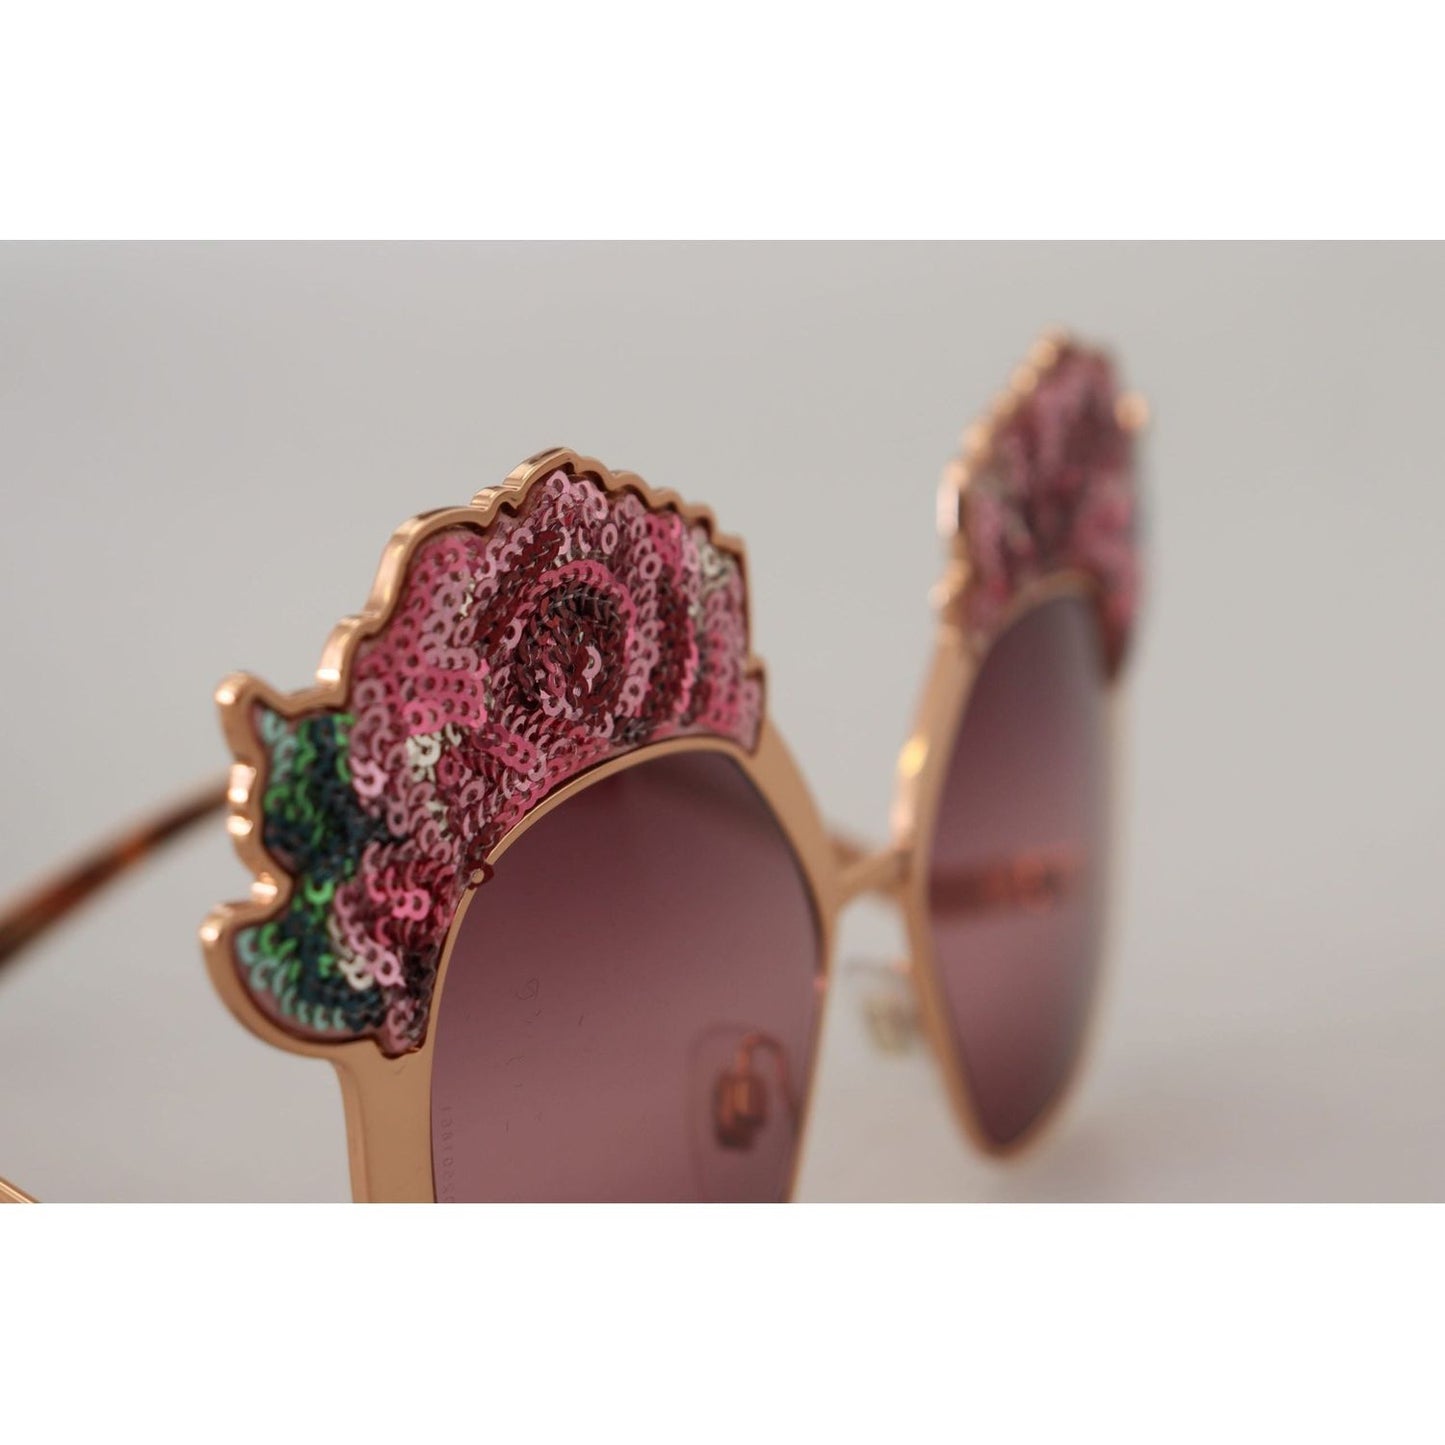 Dolce & Gabbana Chic Rose Sequin Embroidered Sunglasses pink-gold-rose-sequin-embroidery-dg2202-sunglasses IMG_5697-scaled-4459fc7d-ad2.jpg